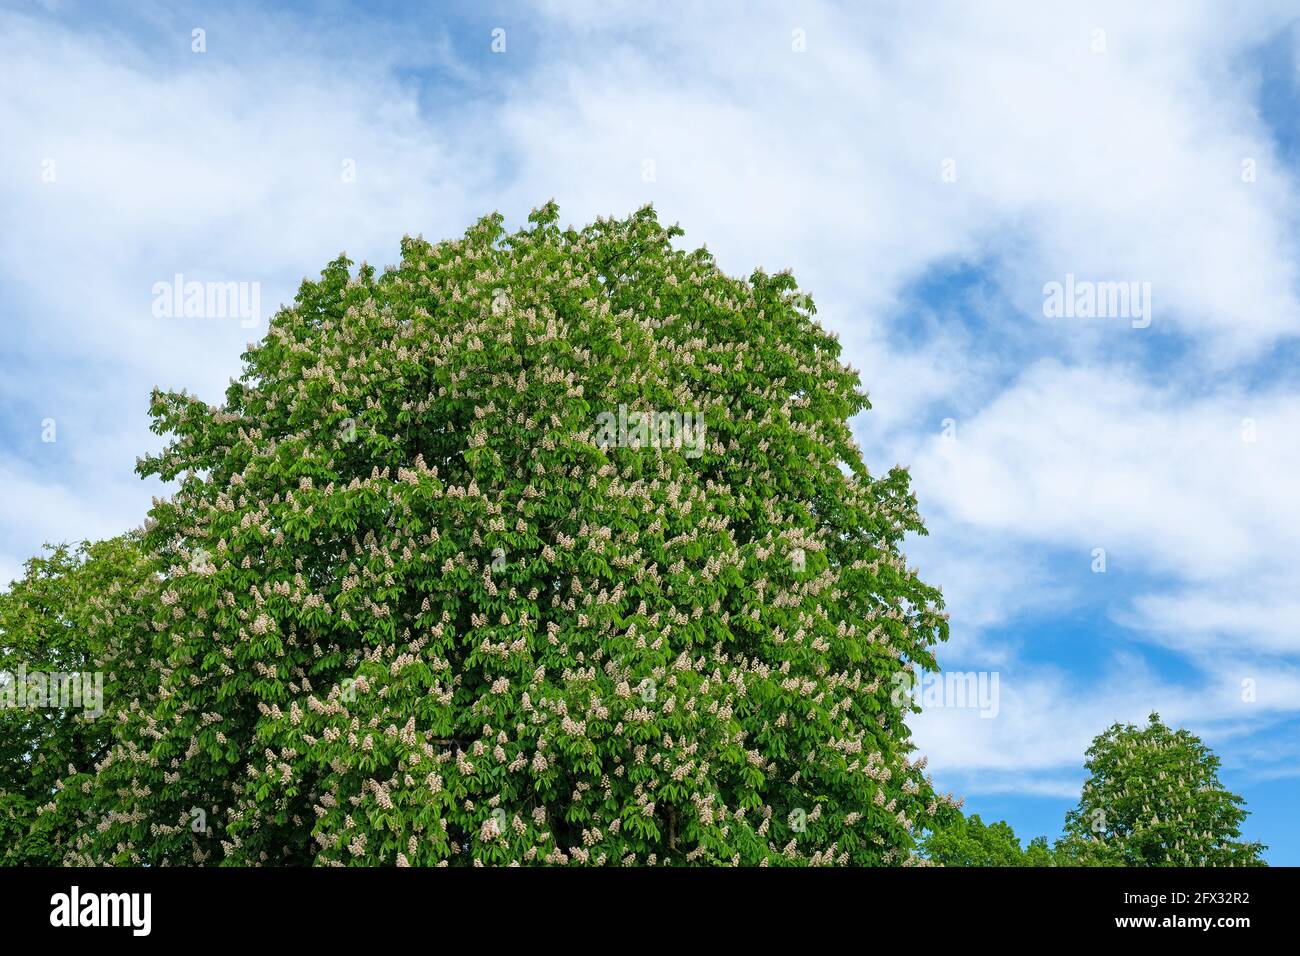 Blooming horse chestnuts in front of sky with clouds Stock Photo